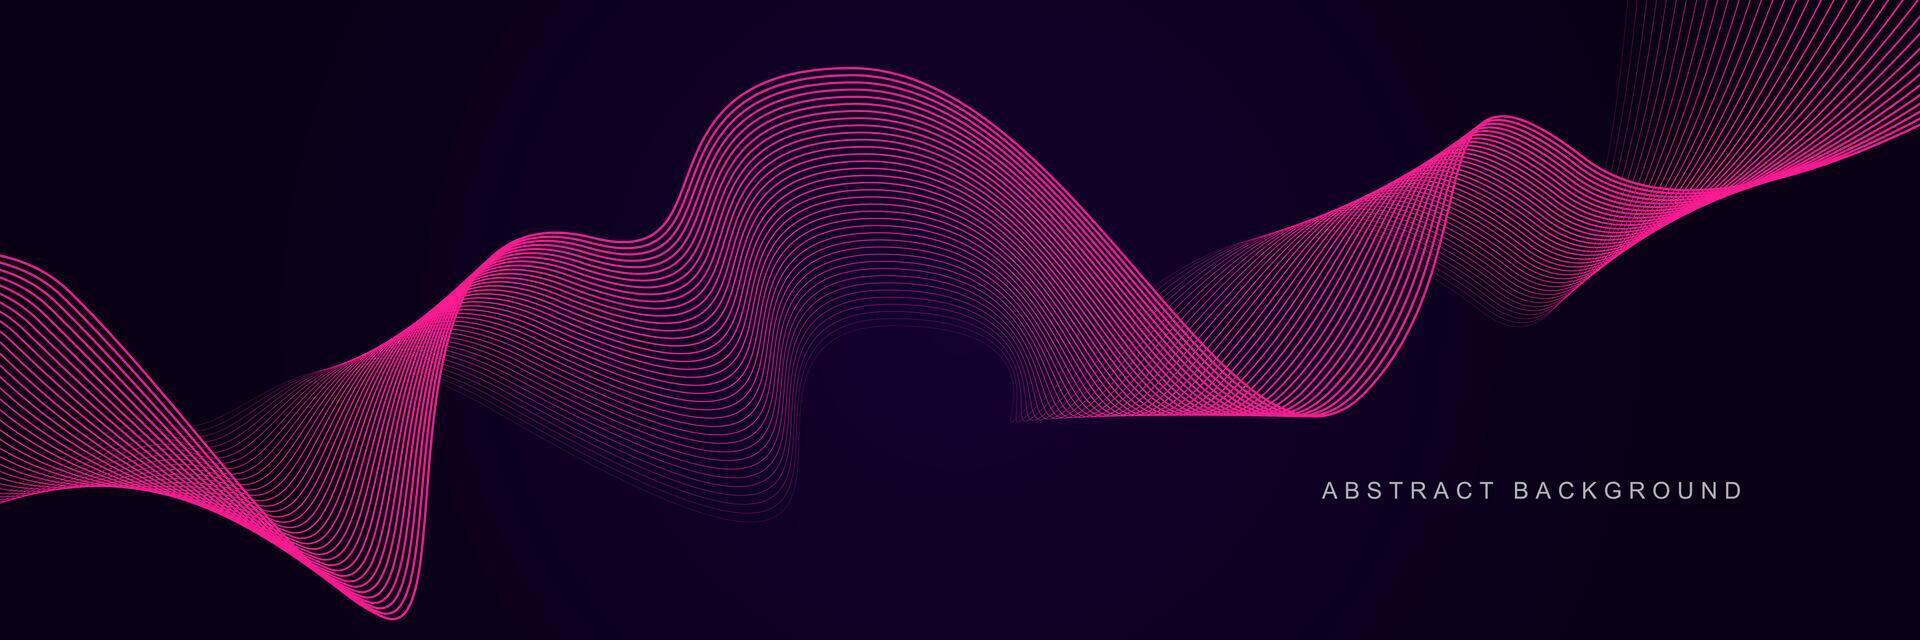 Dark purple abstract background with glowing waves. Shiny lines design element. Modern pink blue gradient flowing wave lines. Futuristic technology concept. illustration vector